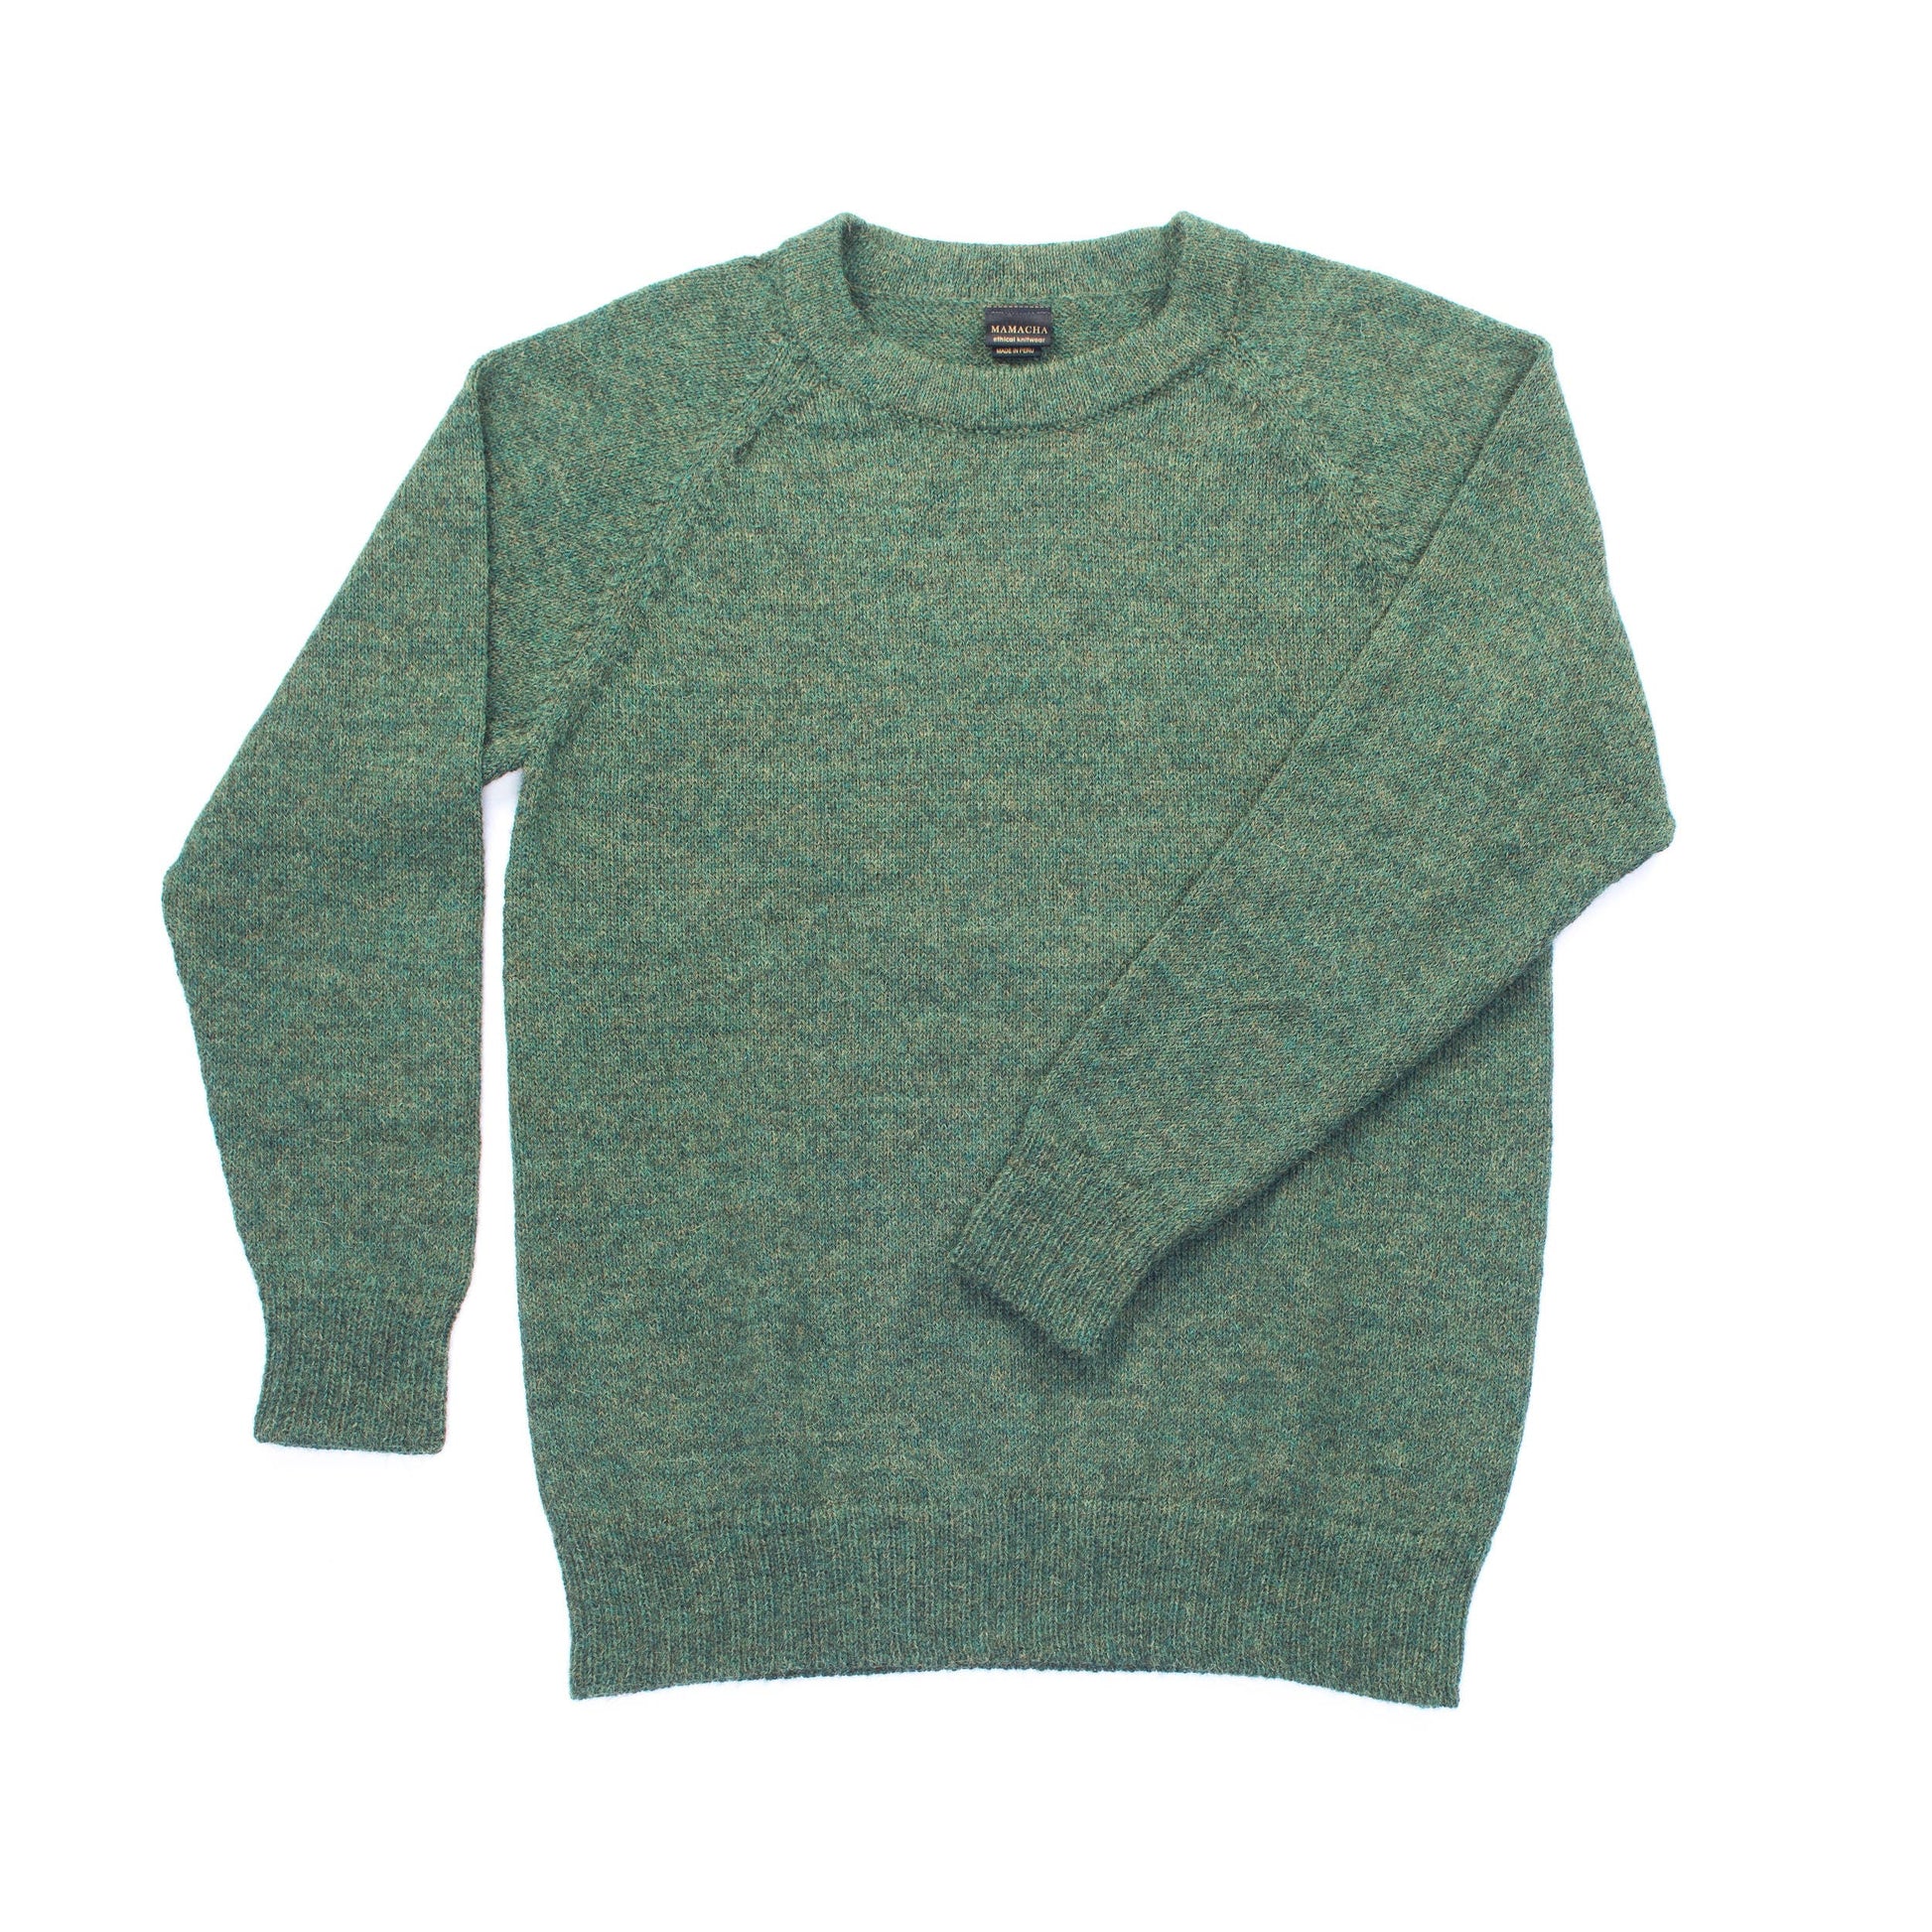 Wool Jumper, Men's 100% Alpaca. Green. Knitted round neck jumper. Crew neck knit jersey. Pullover, natural fibre, ethical, eco. Plastic free